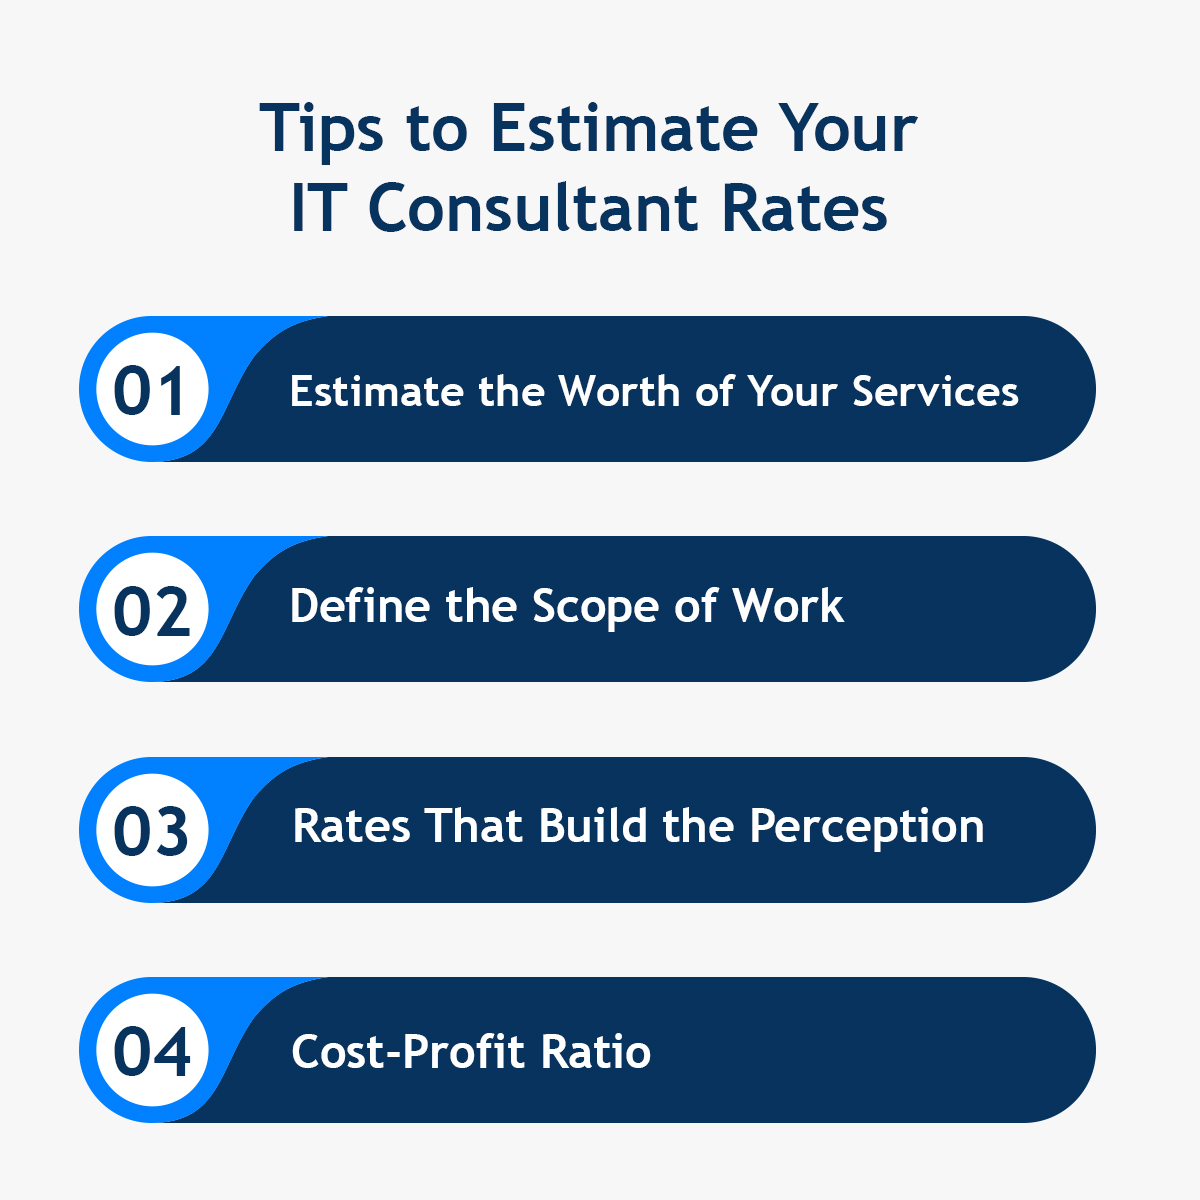 Tips to Estimate Your IT Consultant Rates